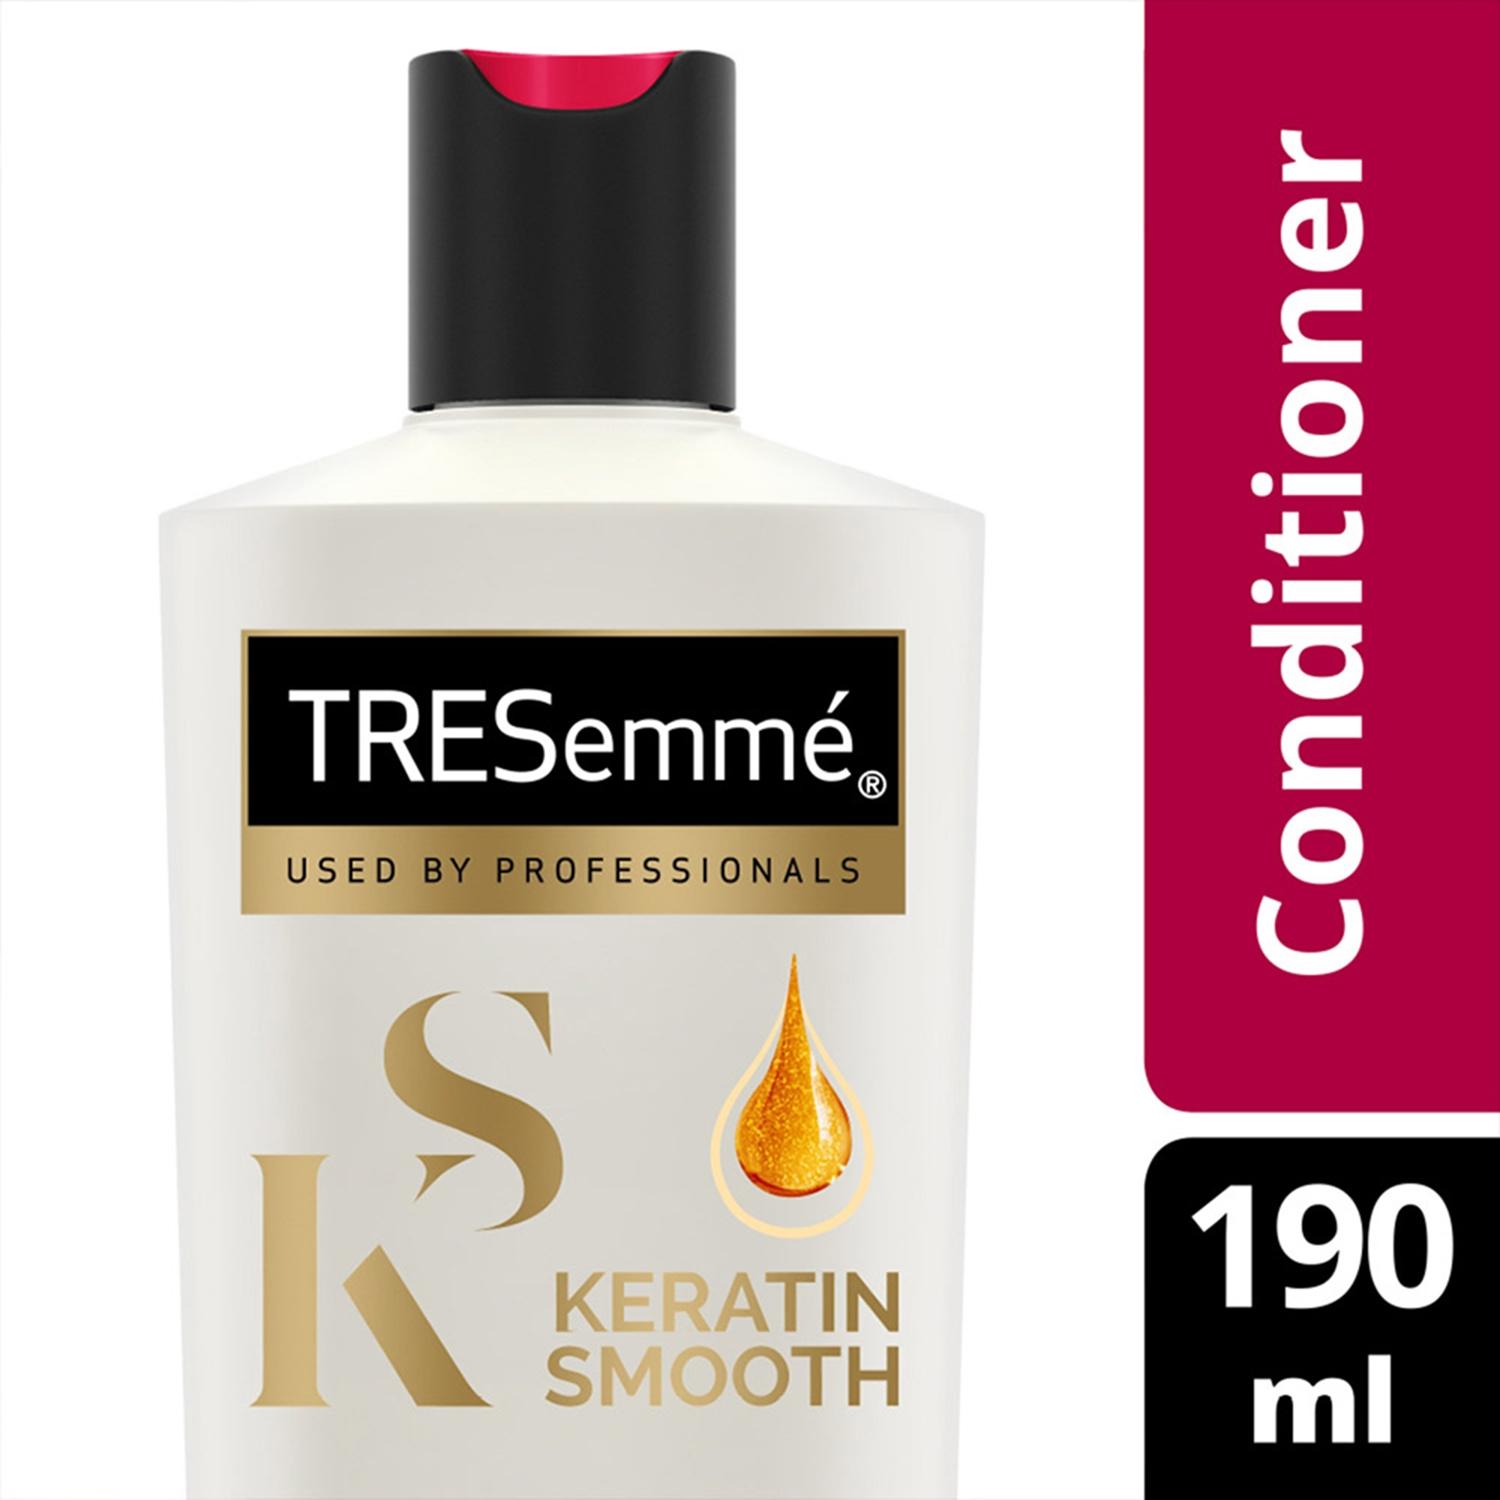 tresemme keratin smooth conditioner - (190ml)